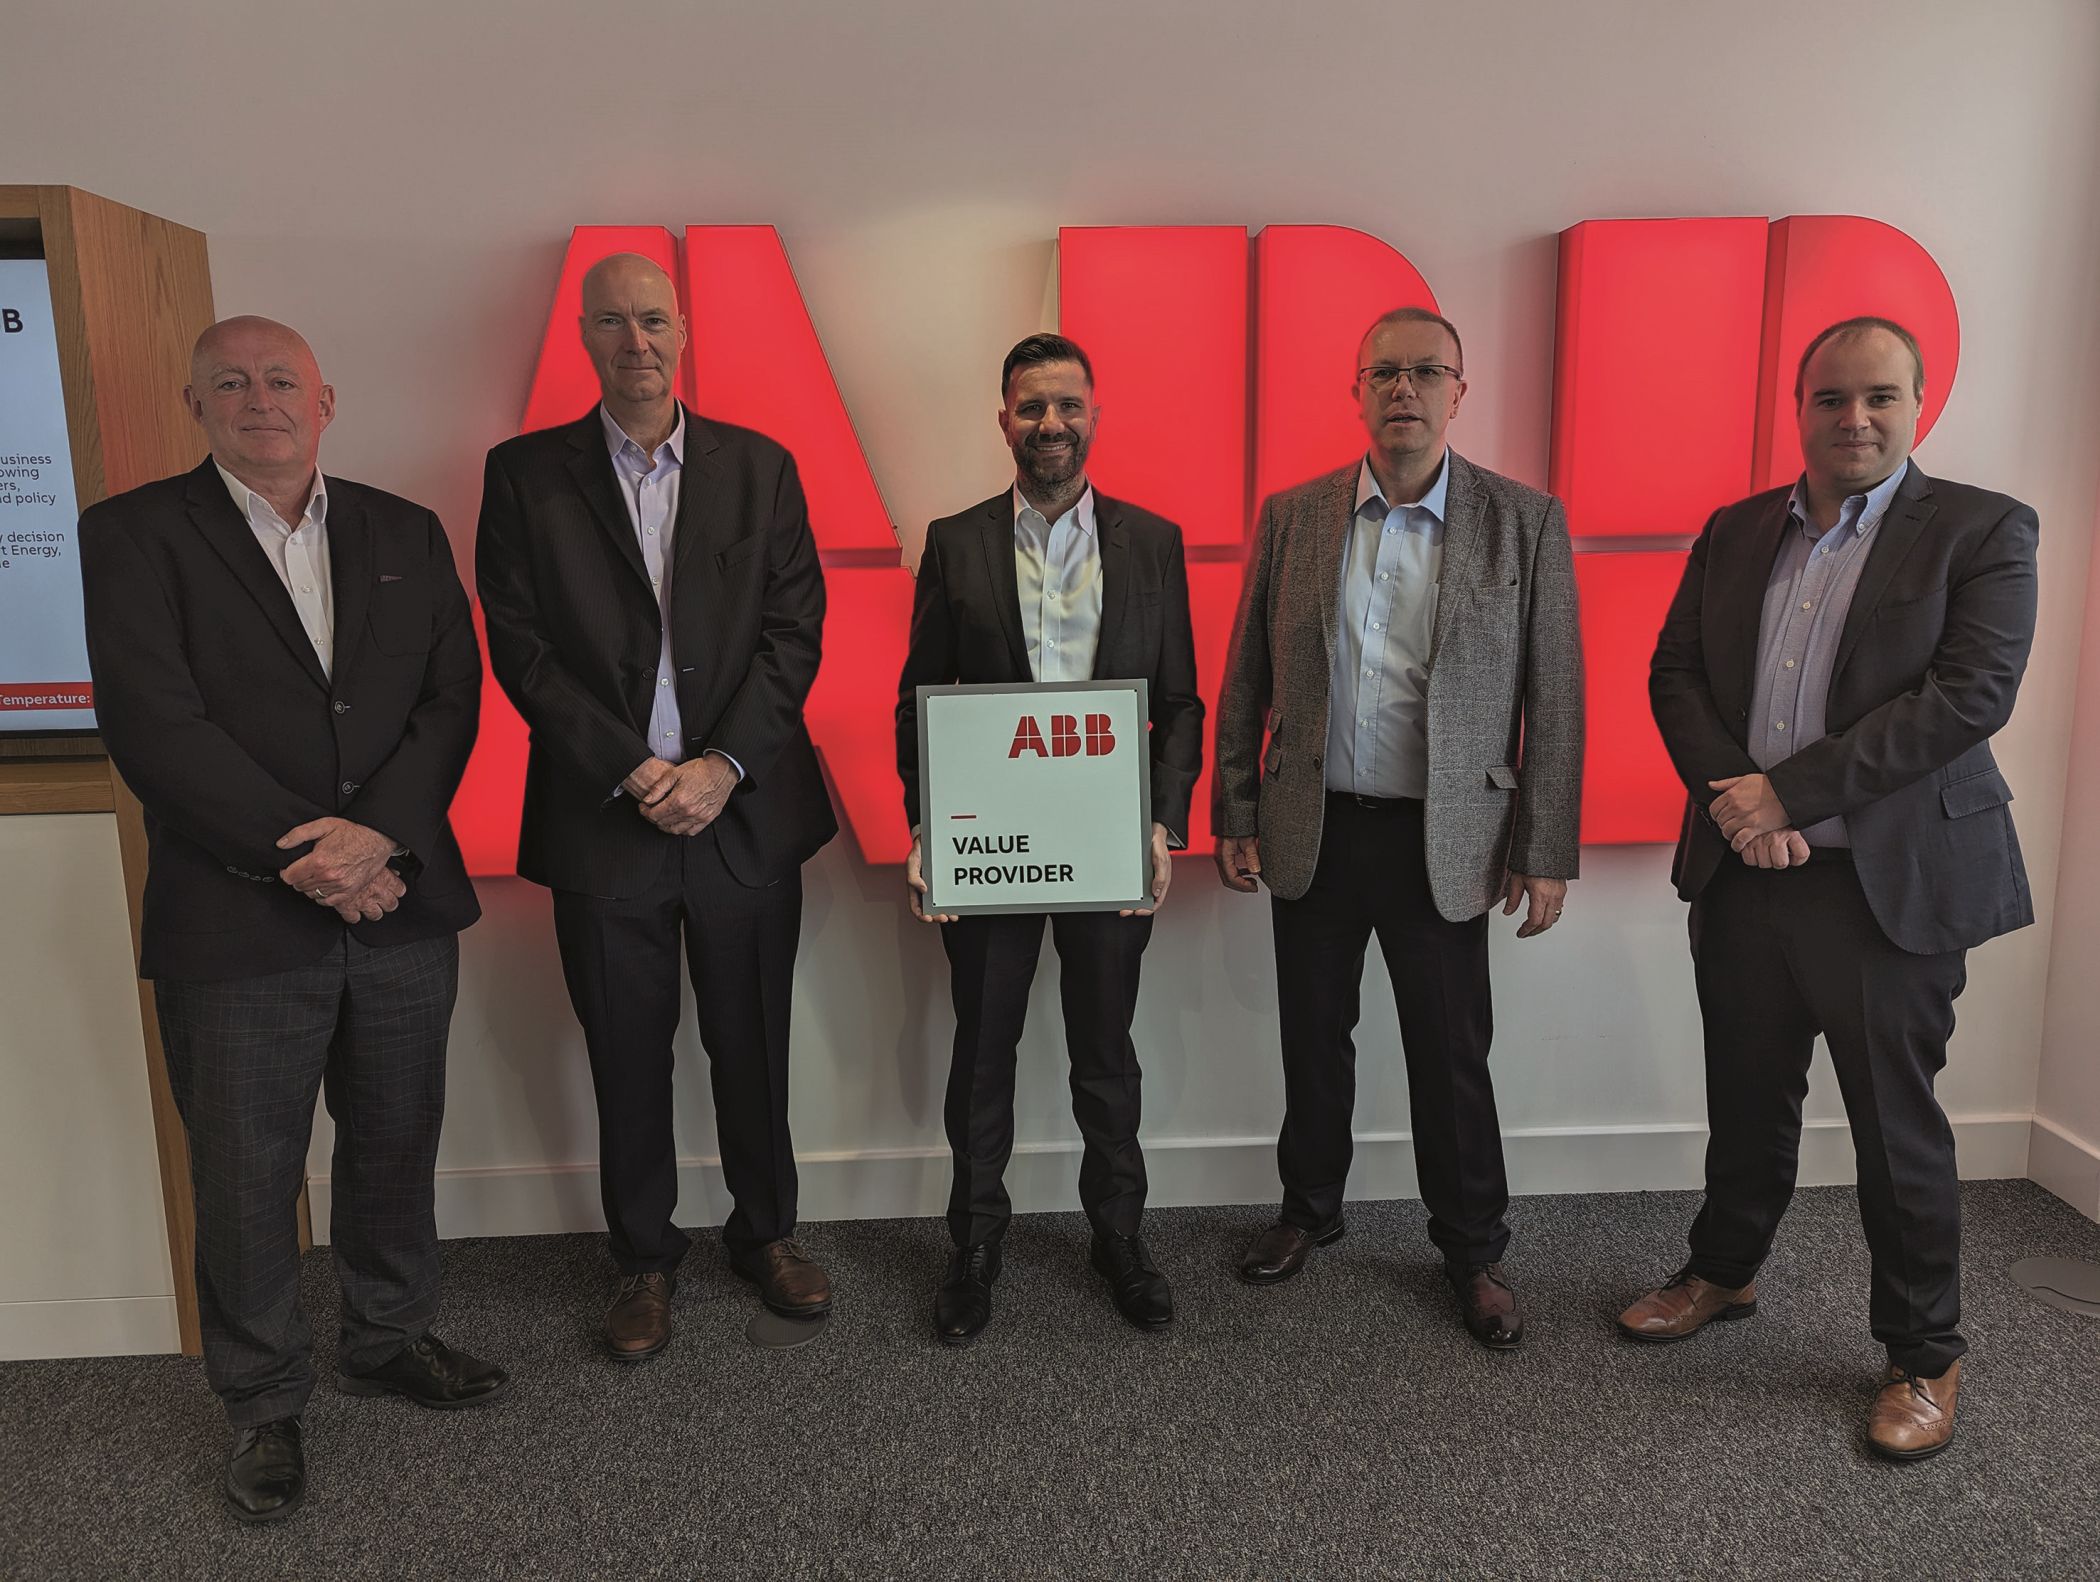 Firstco is the newest member of ABB’s Value Provider program